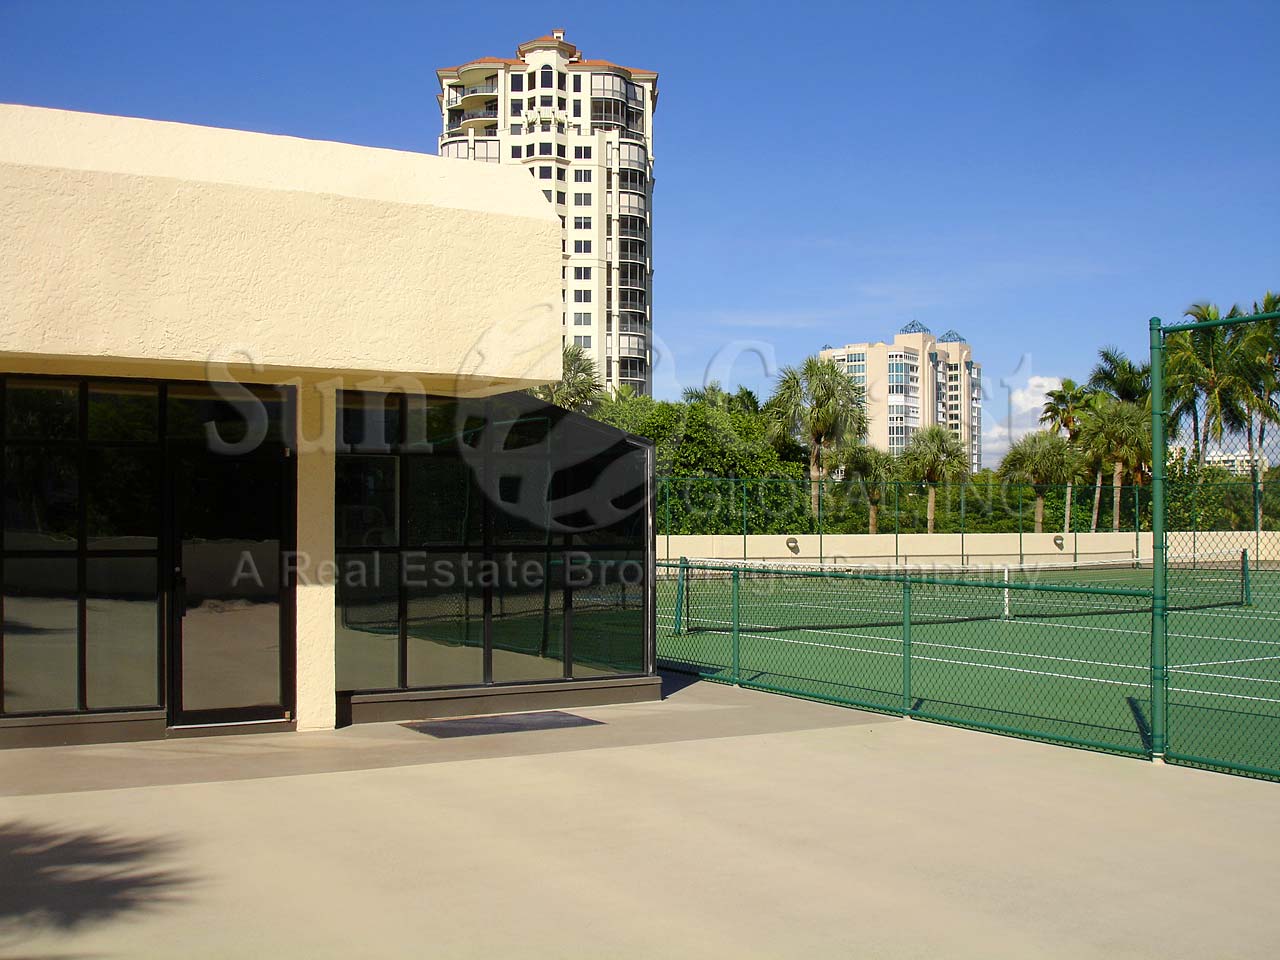 Meridian Club Tennis Courts and Fitness Facilities